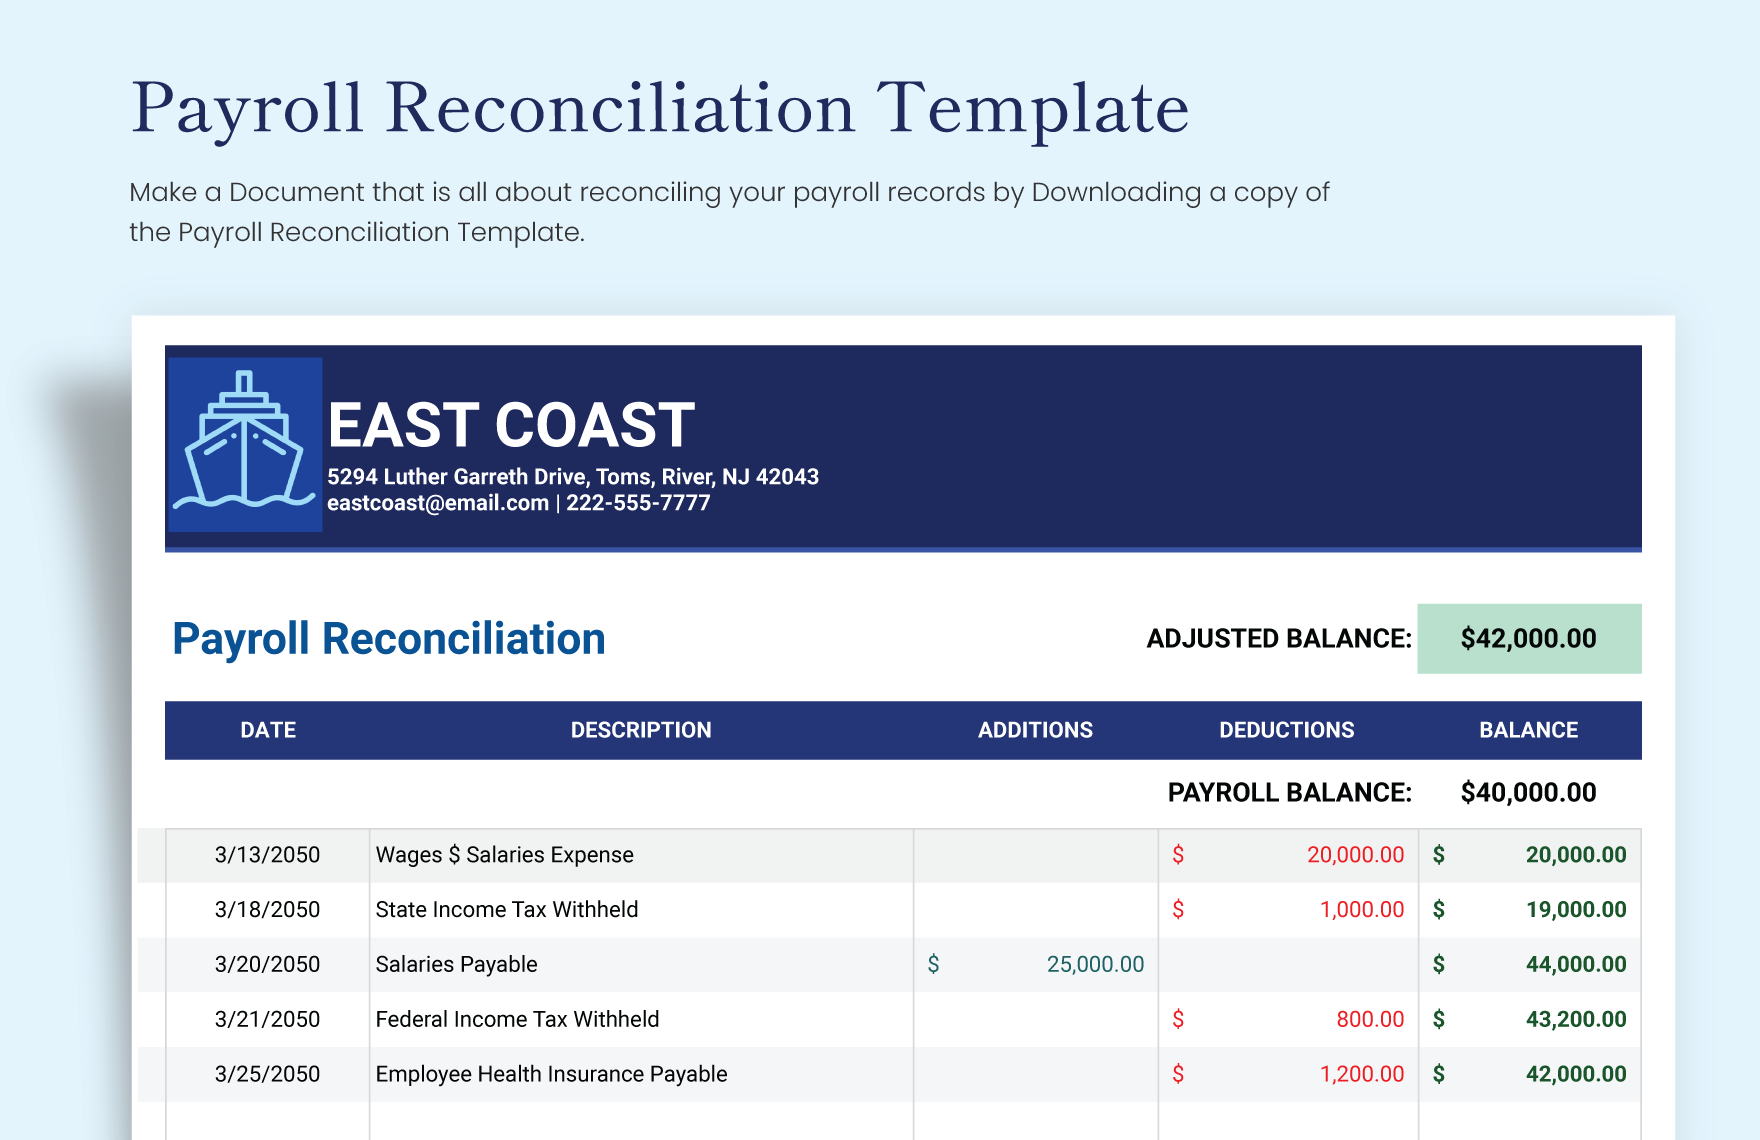 Payroll Reconciliation Template